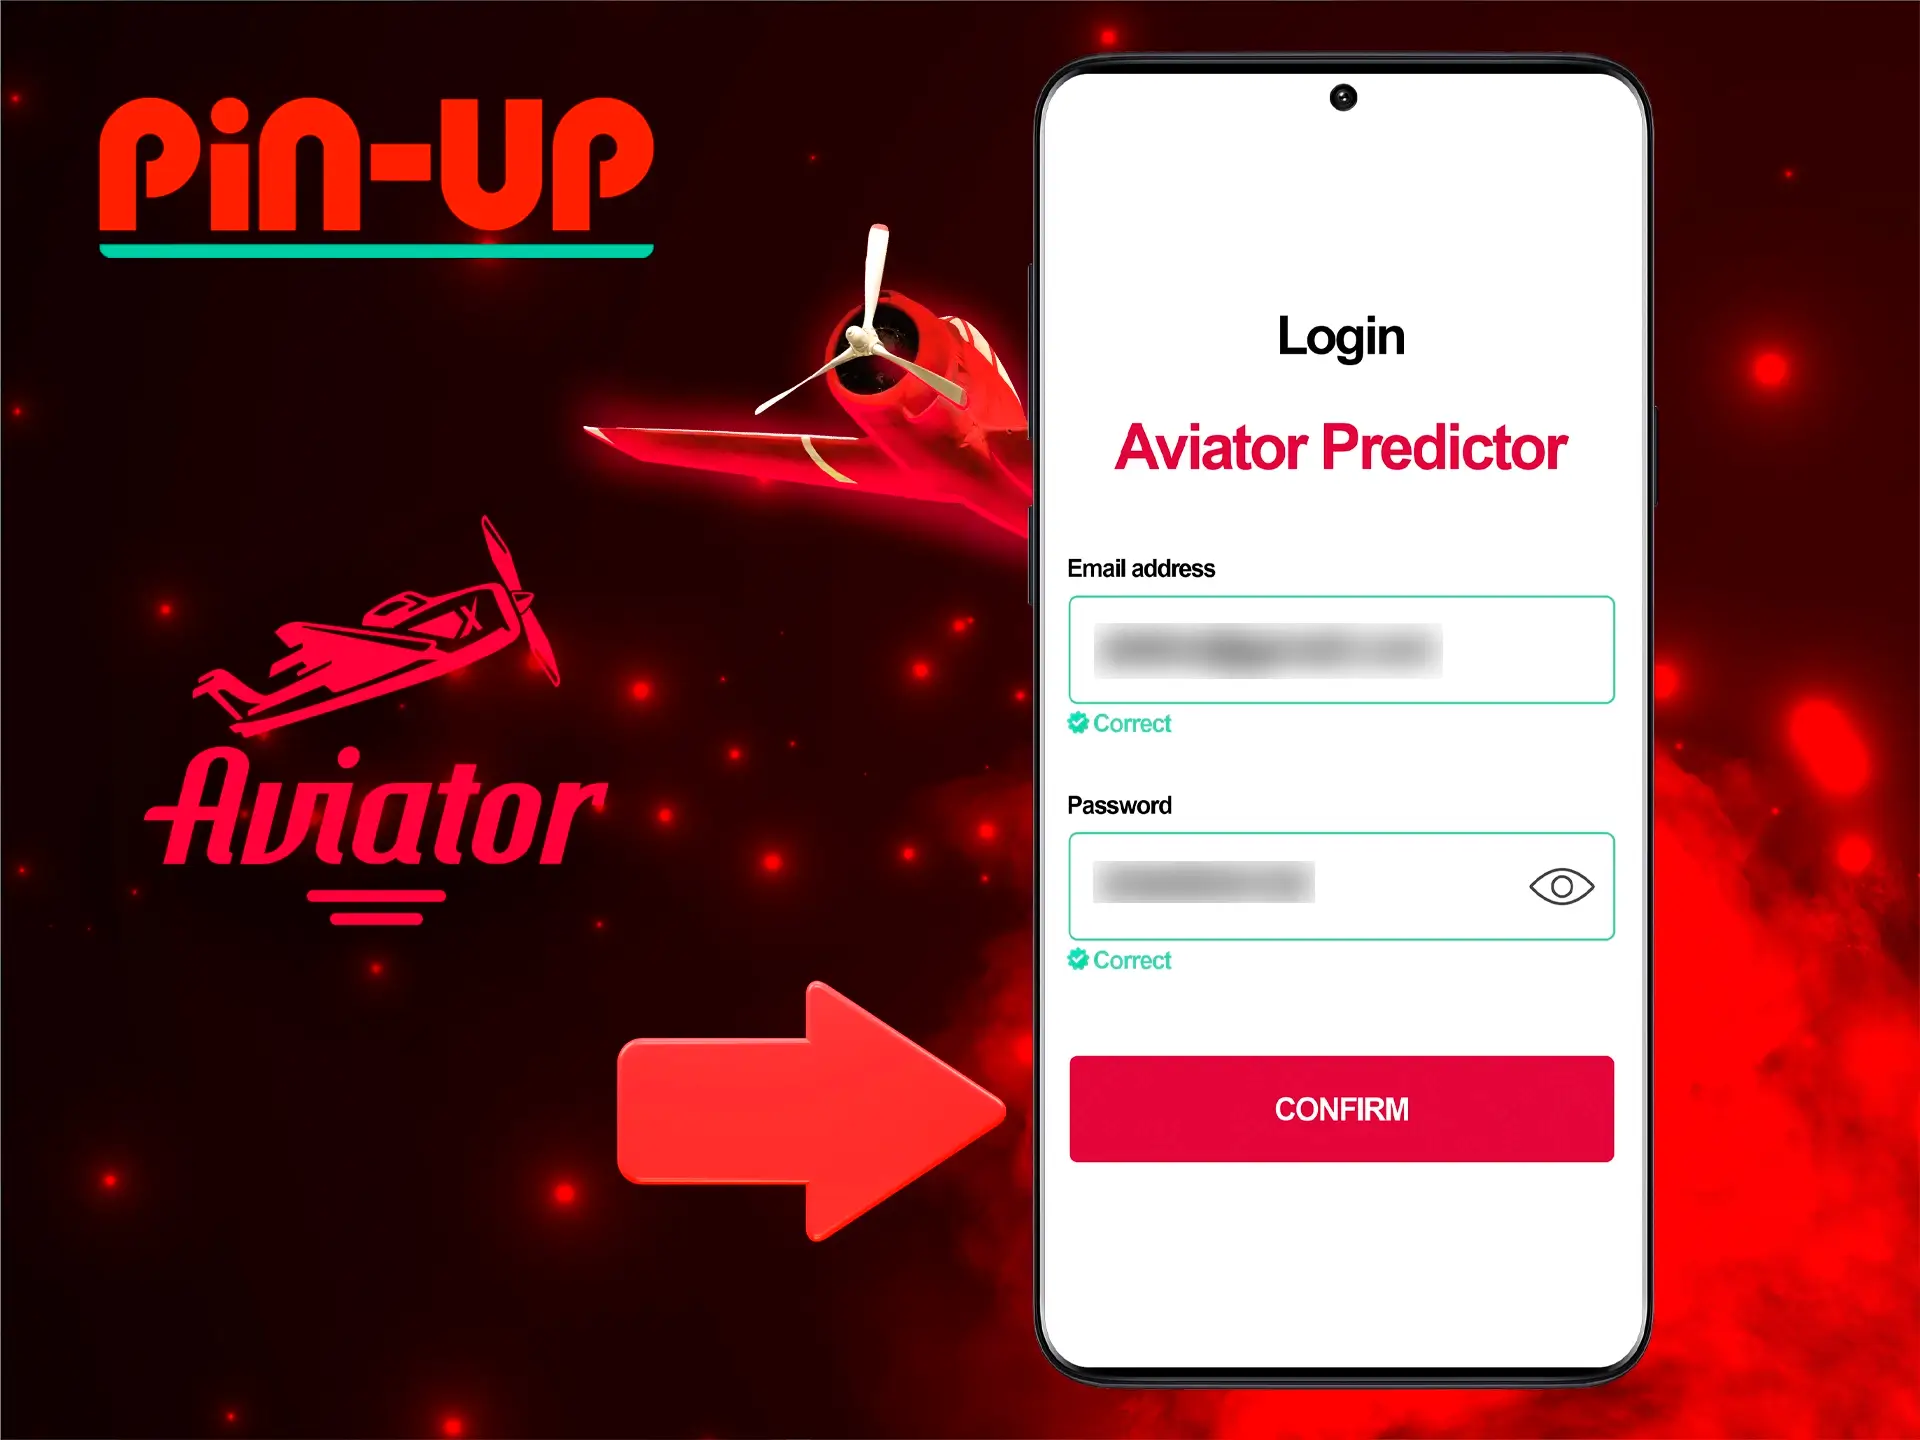 Log in with your personal account to Pin-Up's Predictor app to unlock full access to features and start earning big.